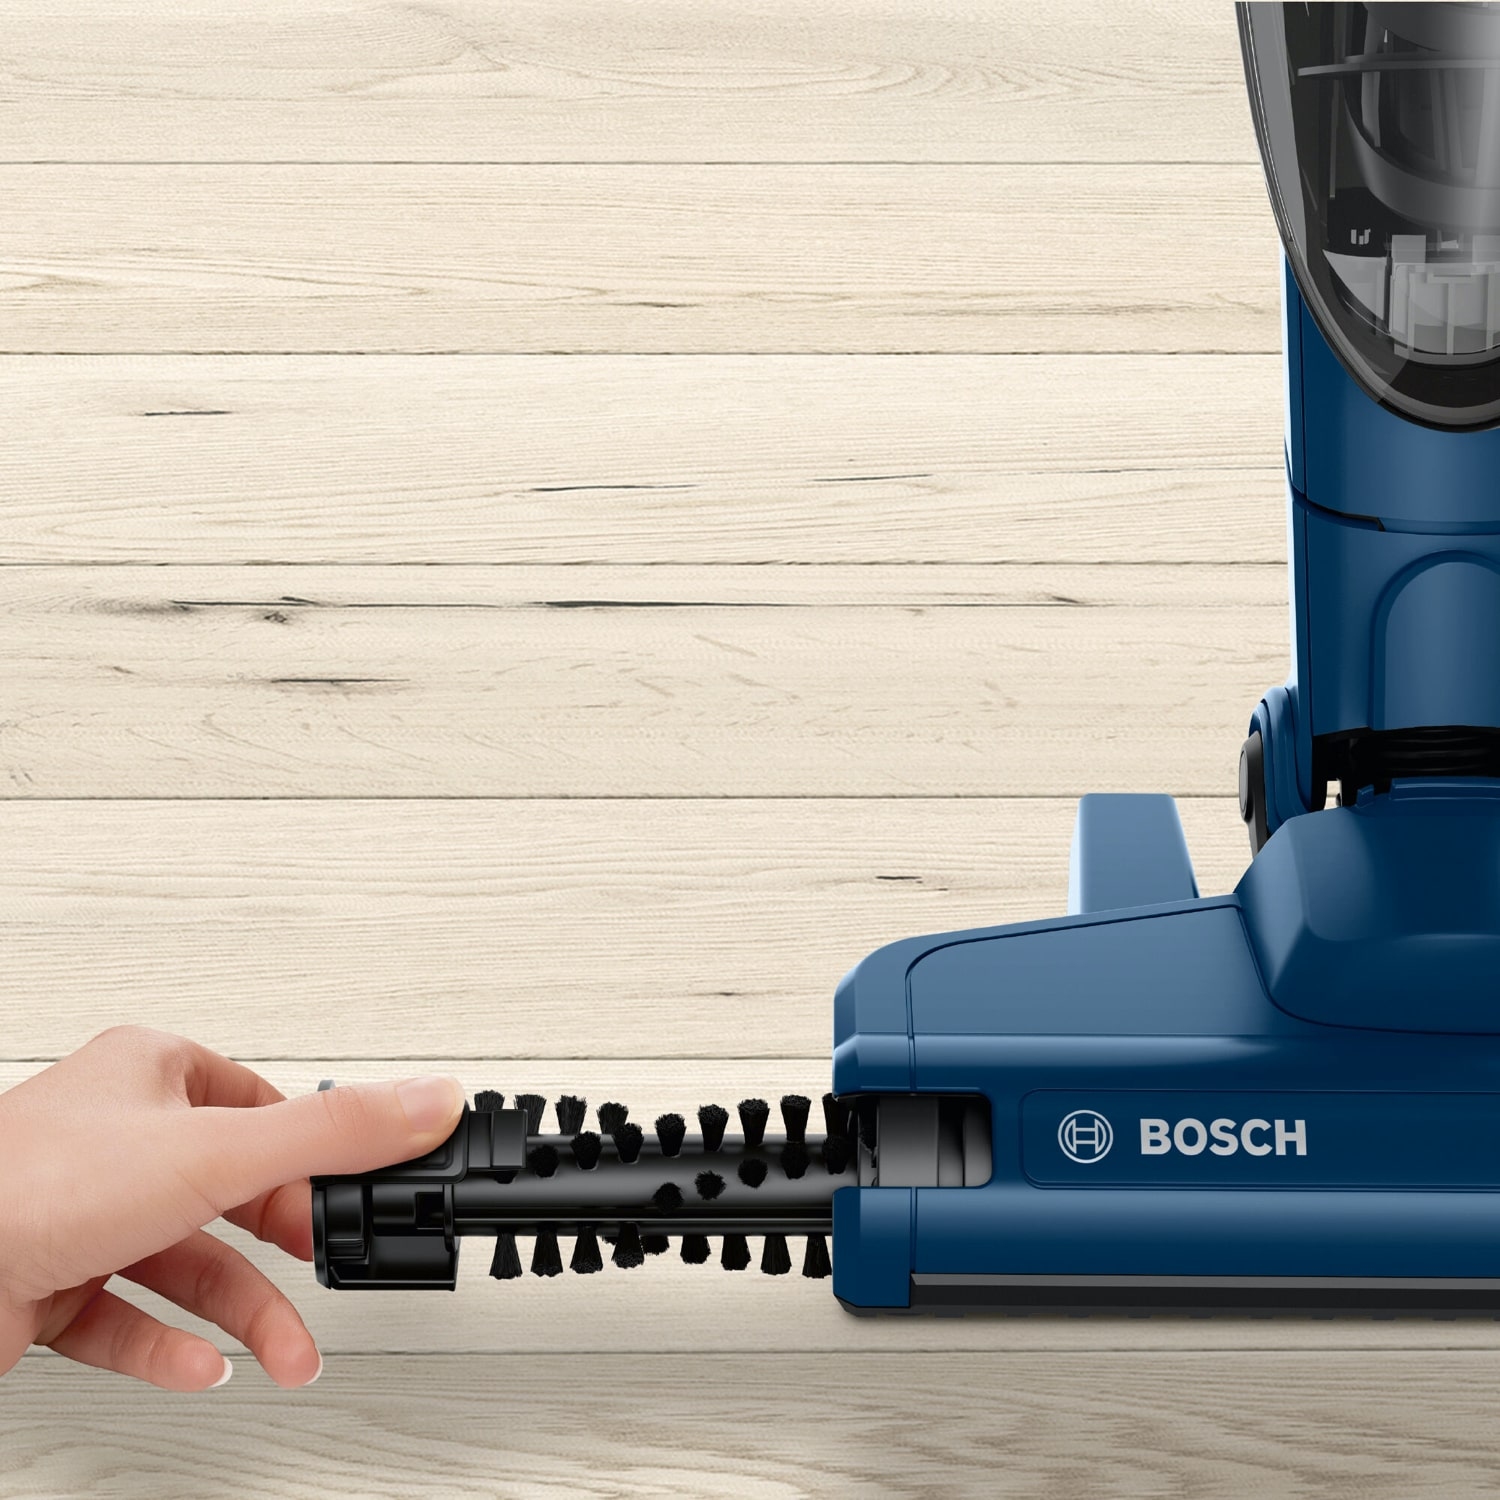 Bosch BCHF216GB Readyy'y Serie 2 ProClean Cordless Vacuum Cleaner - 40 Minute Run Time - 6